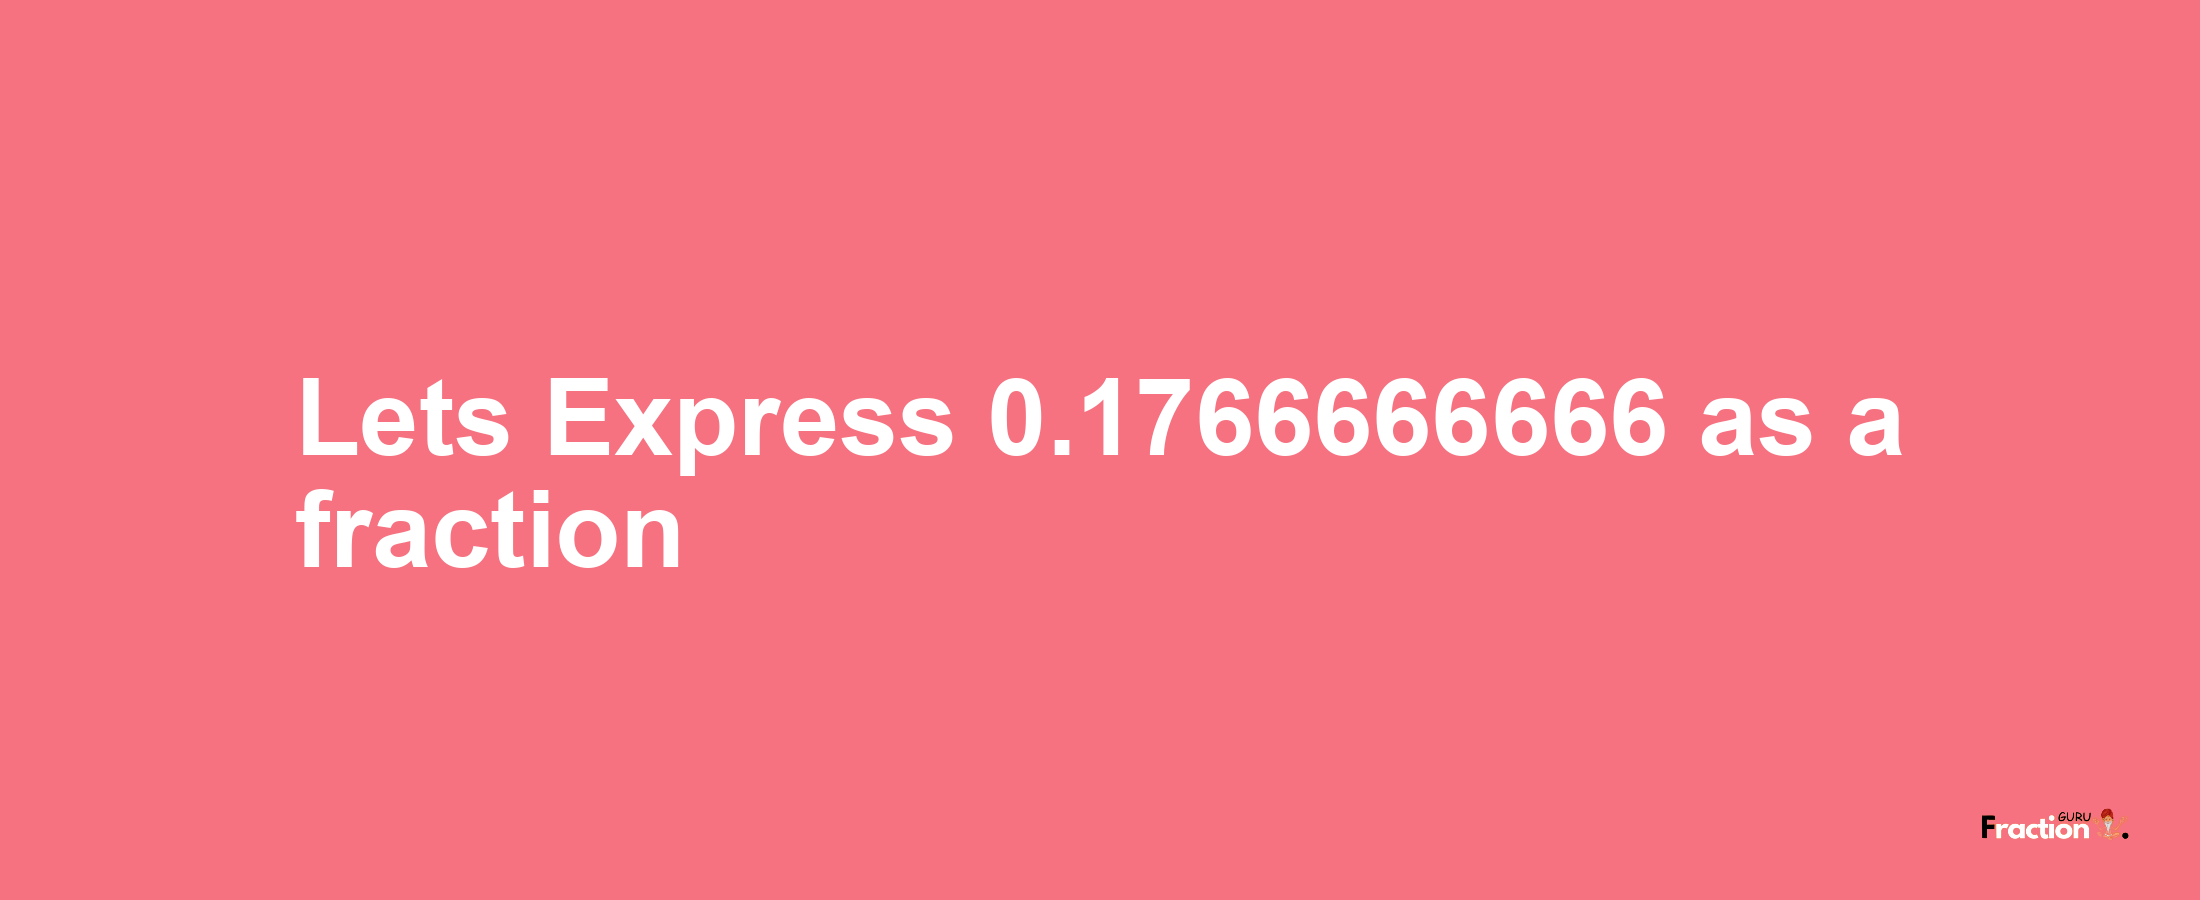 Lets Express 0.1766666666 as afraction